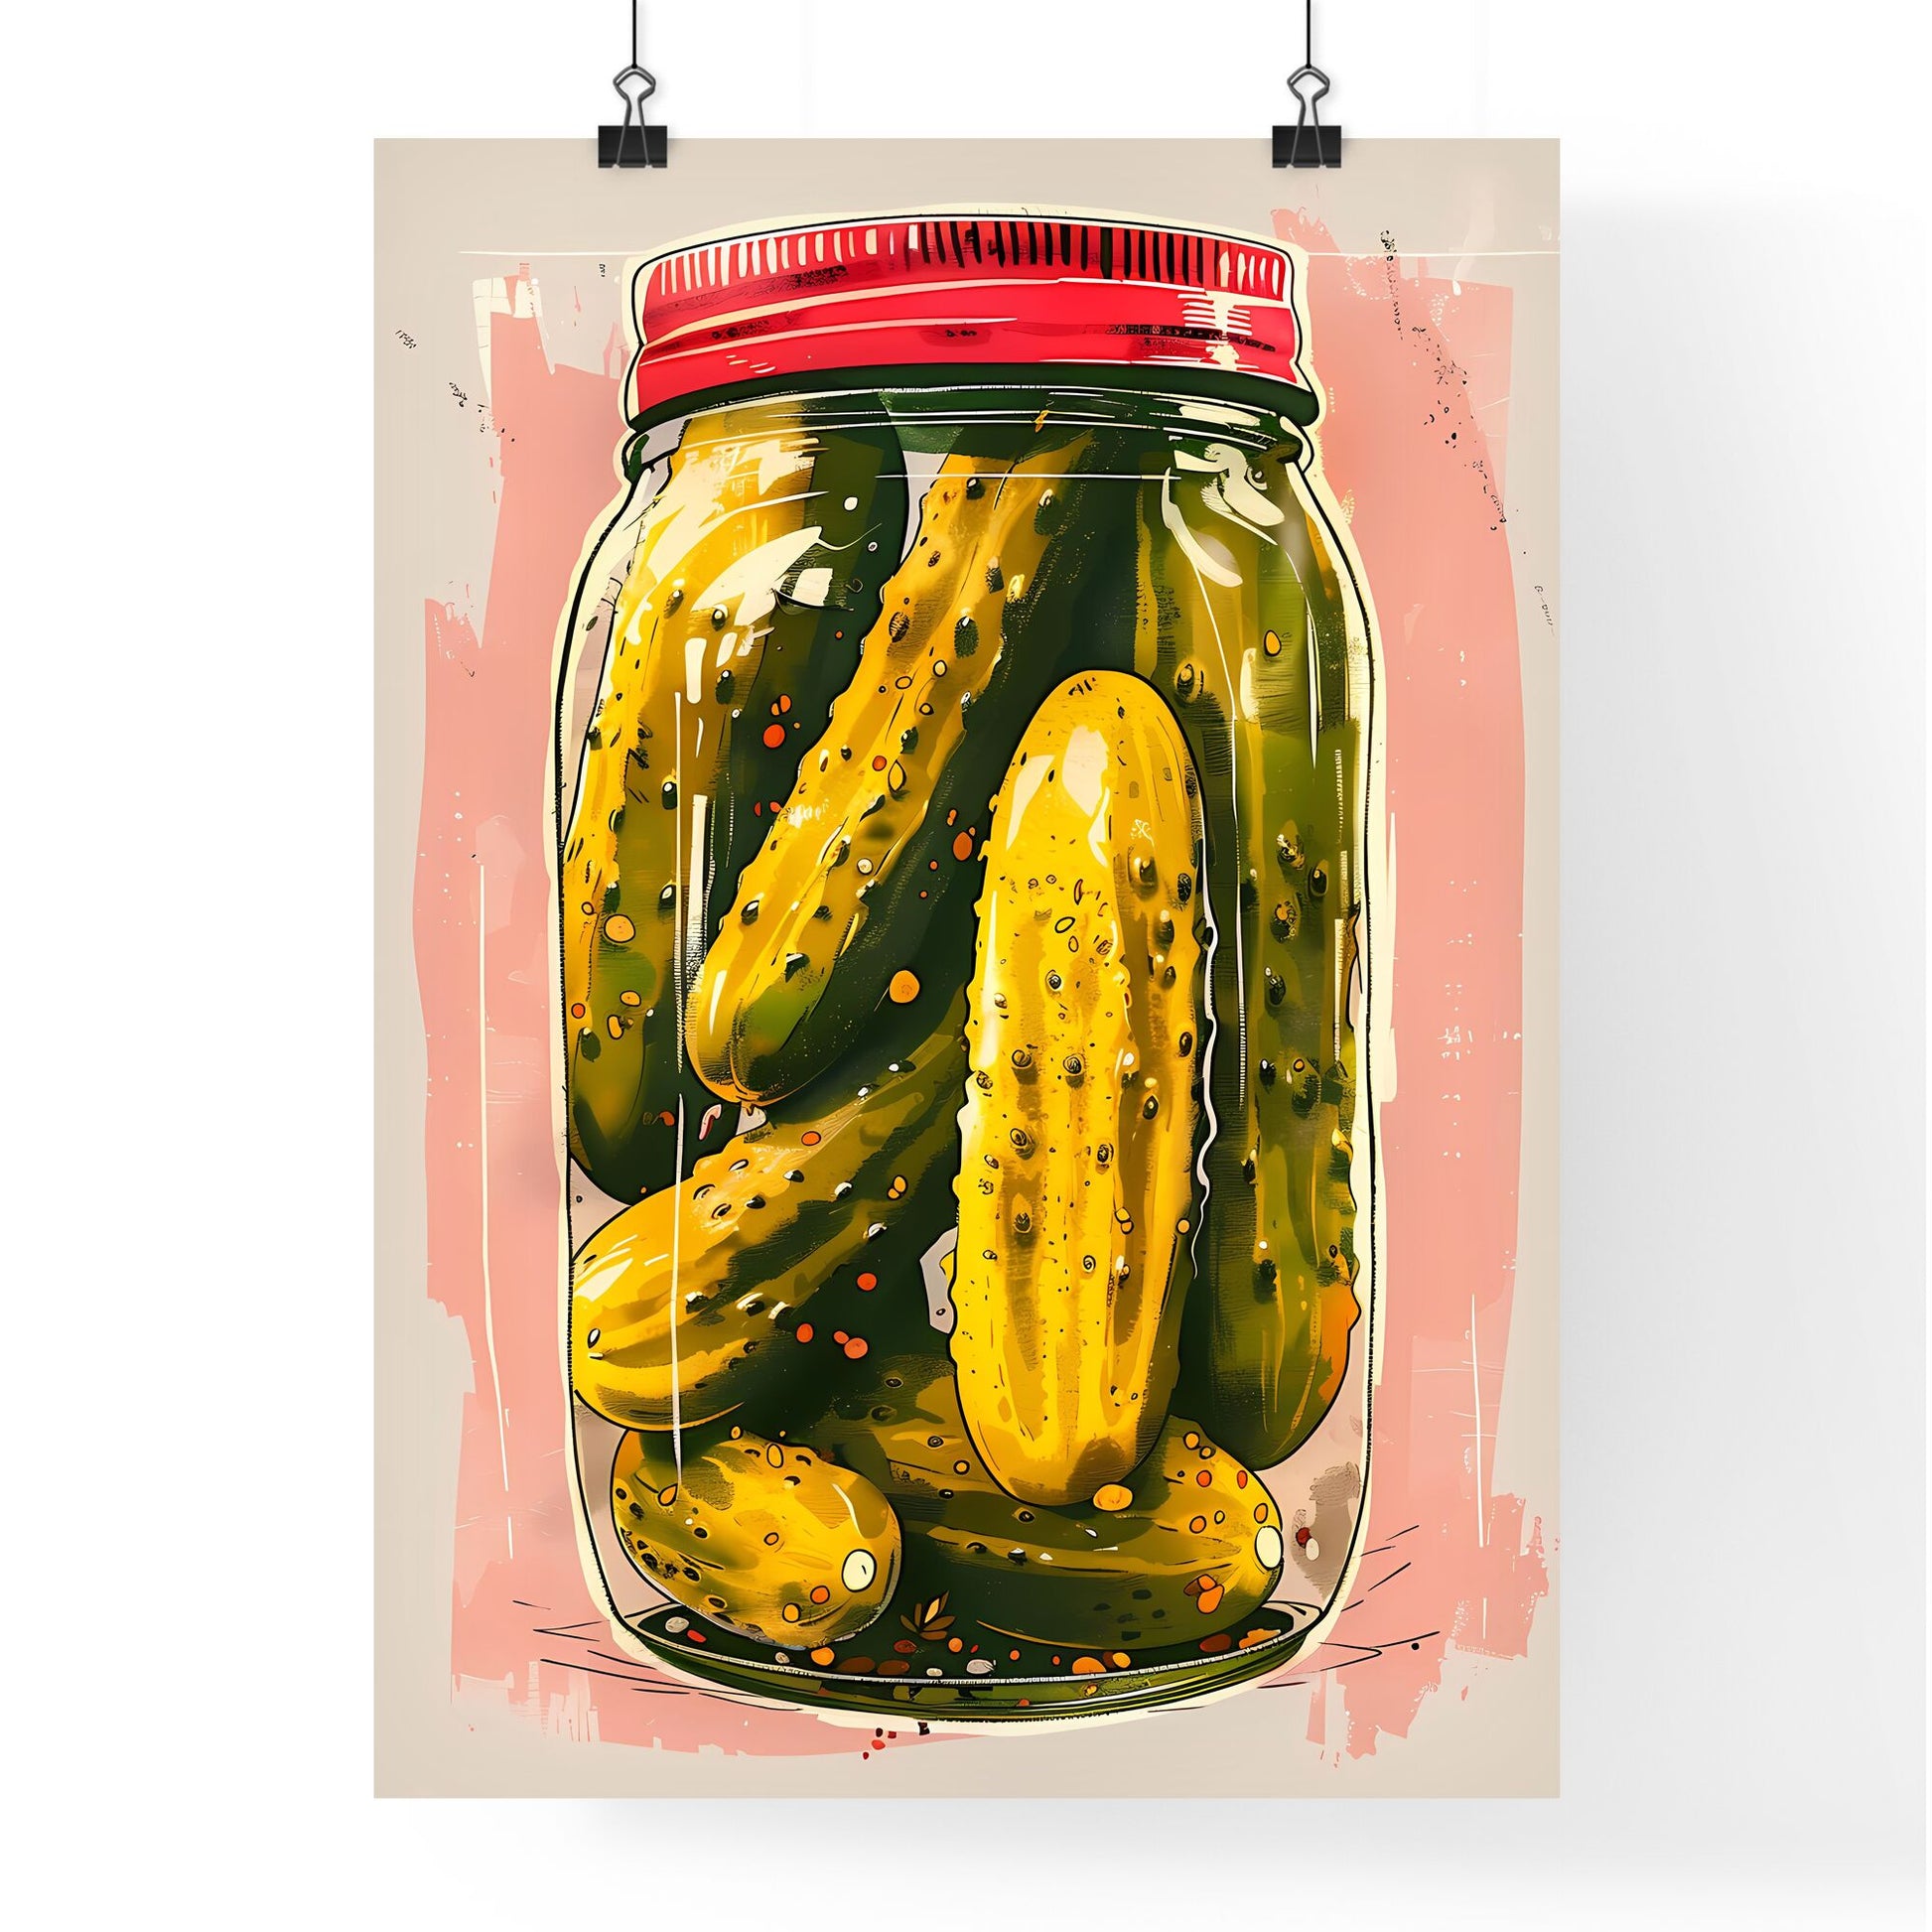 Vibrant Pink Digital Painting of Jar of Pickles on White Background - Contemporary Food Art Default Title